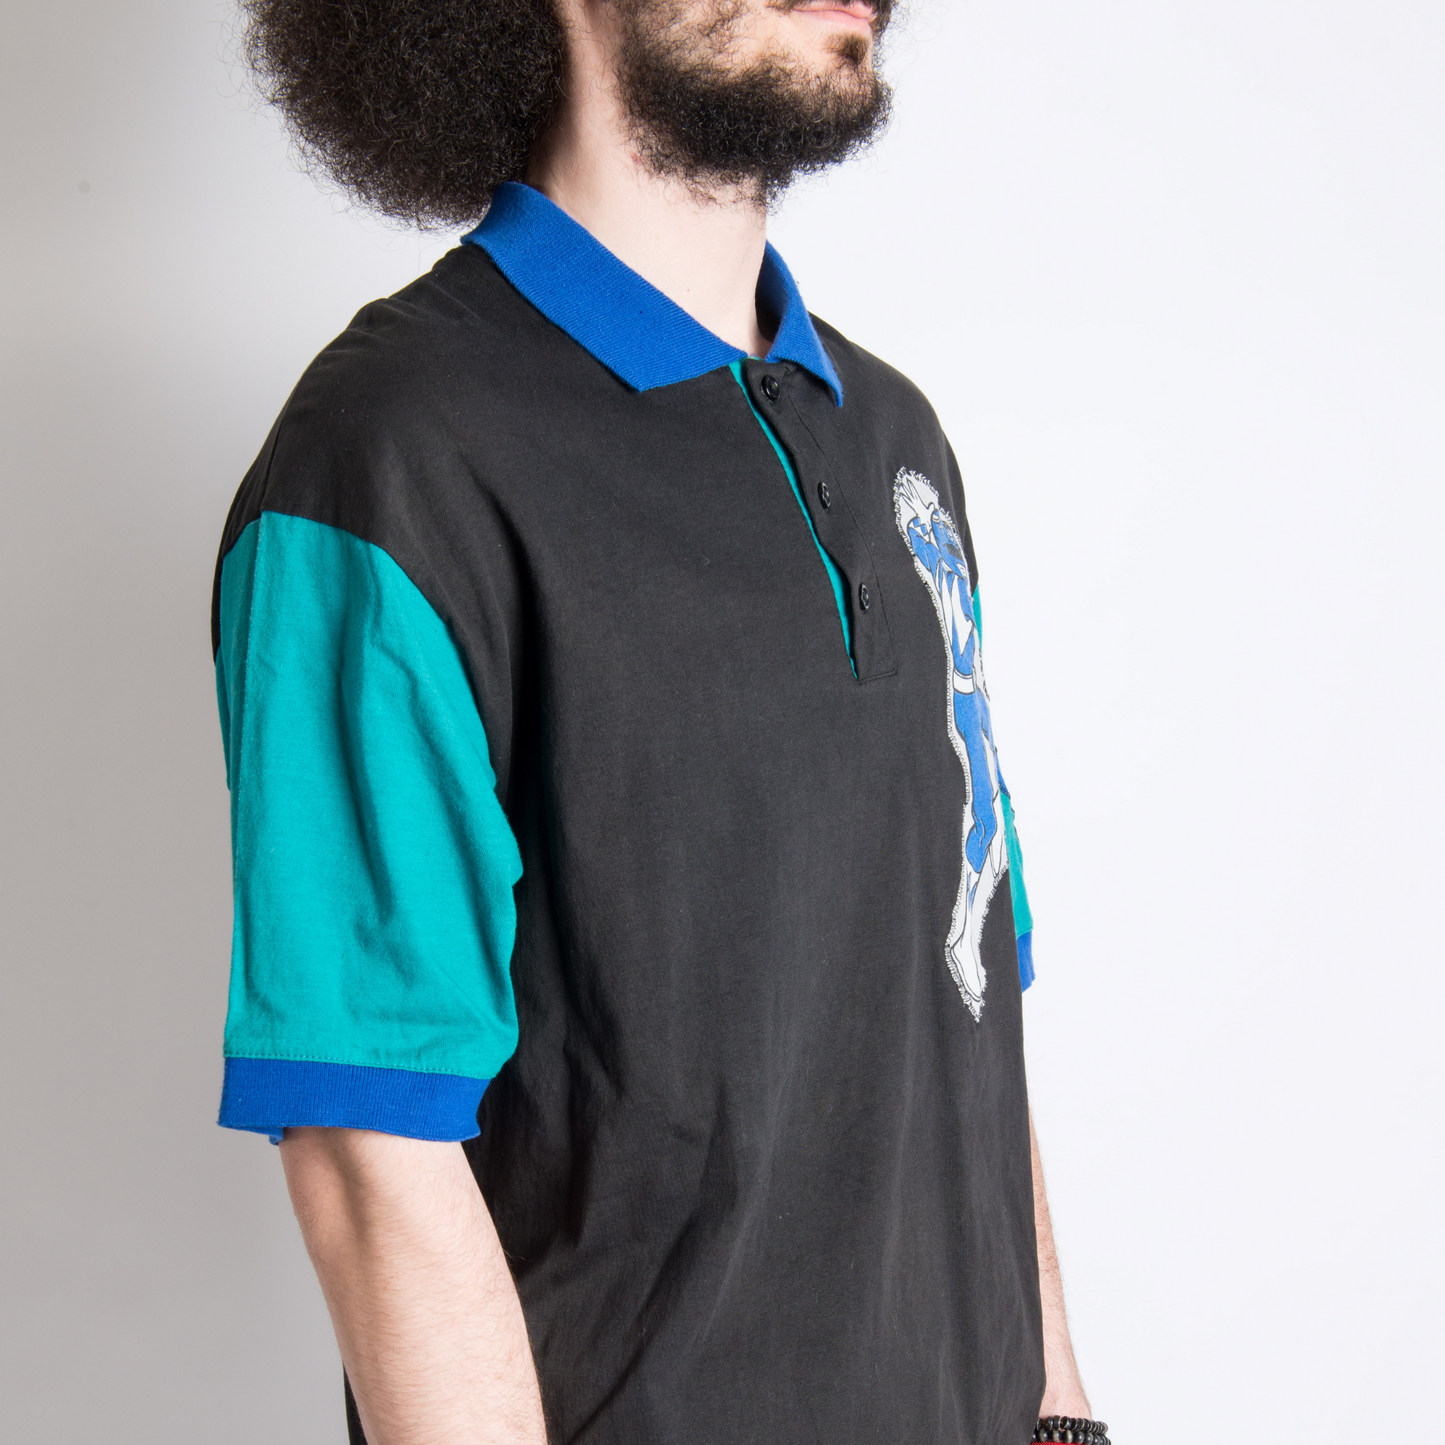 Revamped Clothing Toronto - Repurposed Upcycled Alterations Repairs Parkdale  - Power Ranger polo 